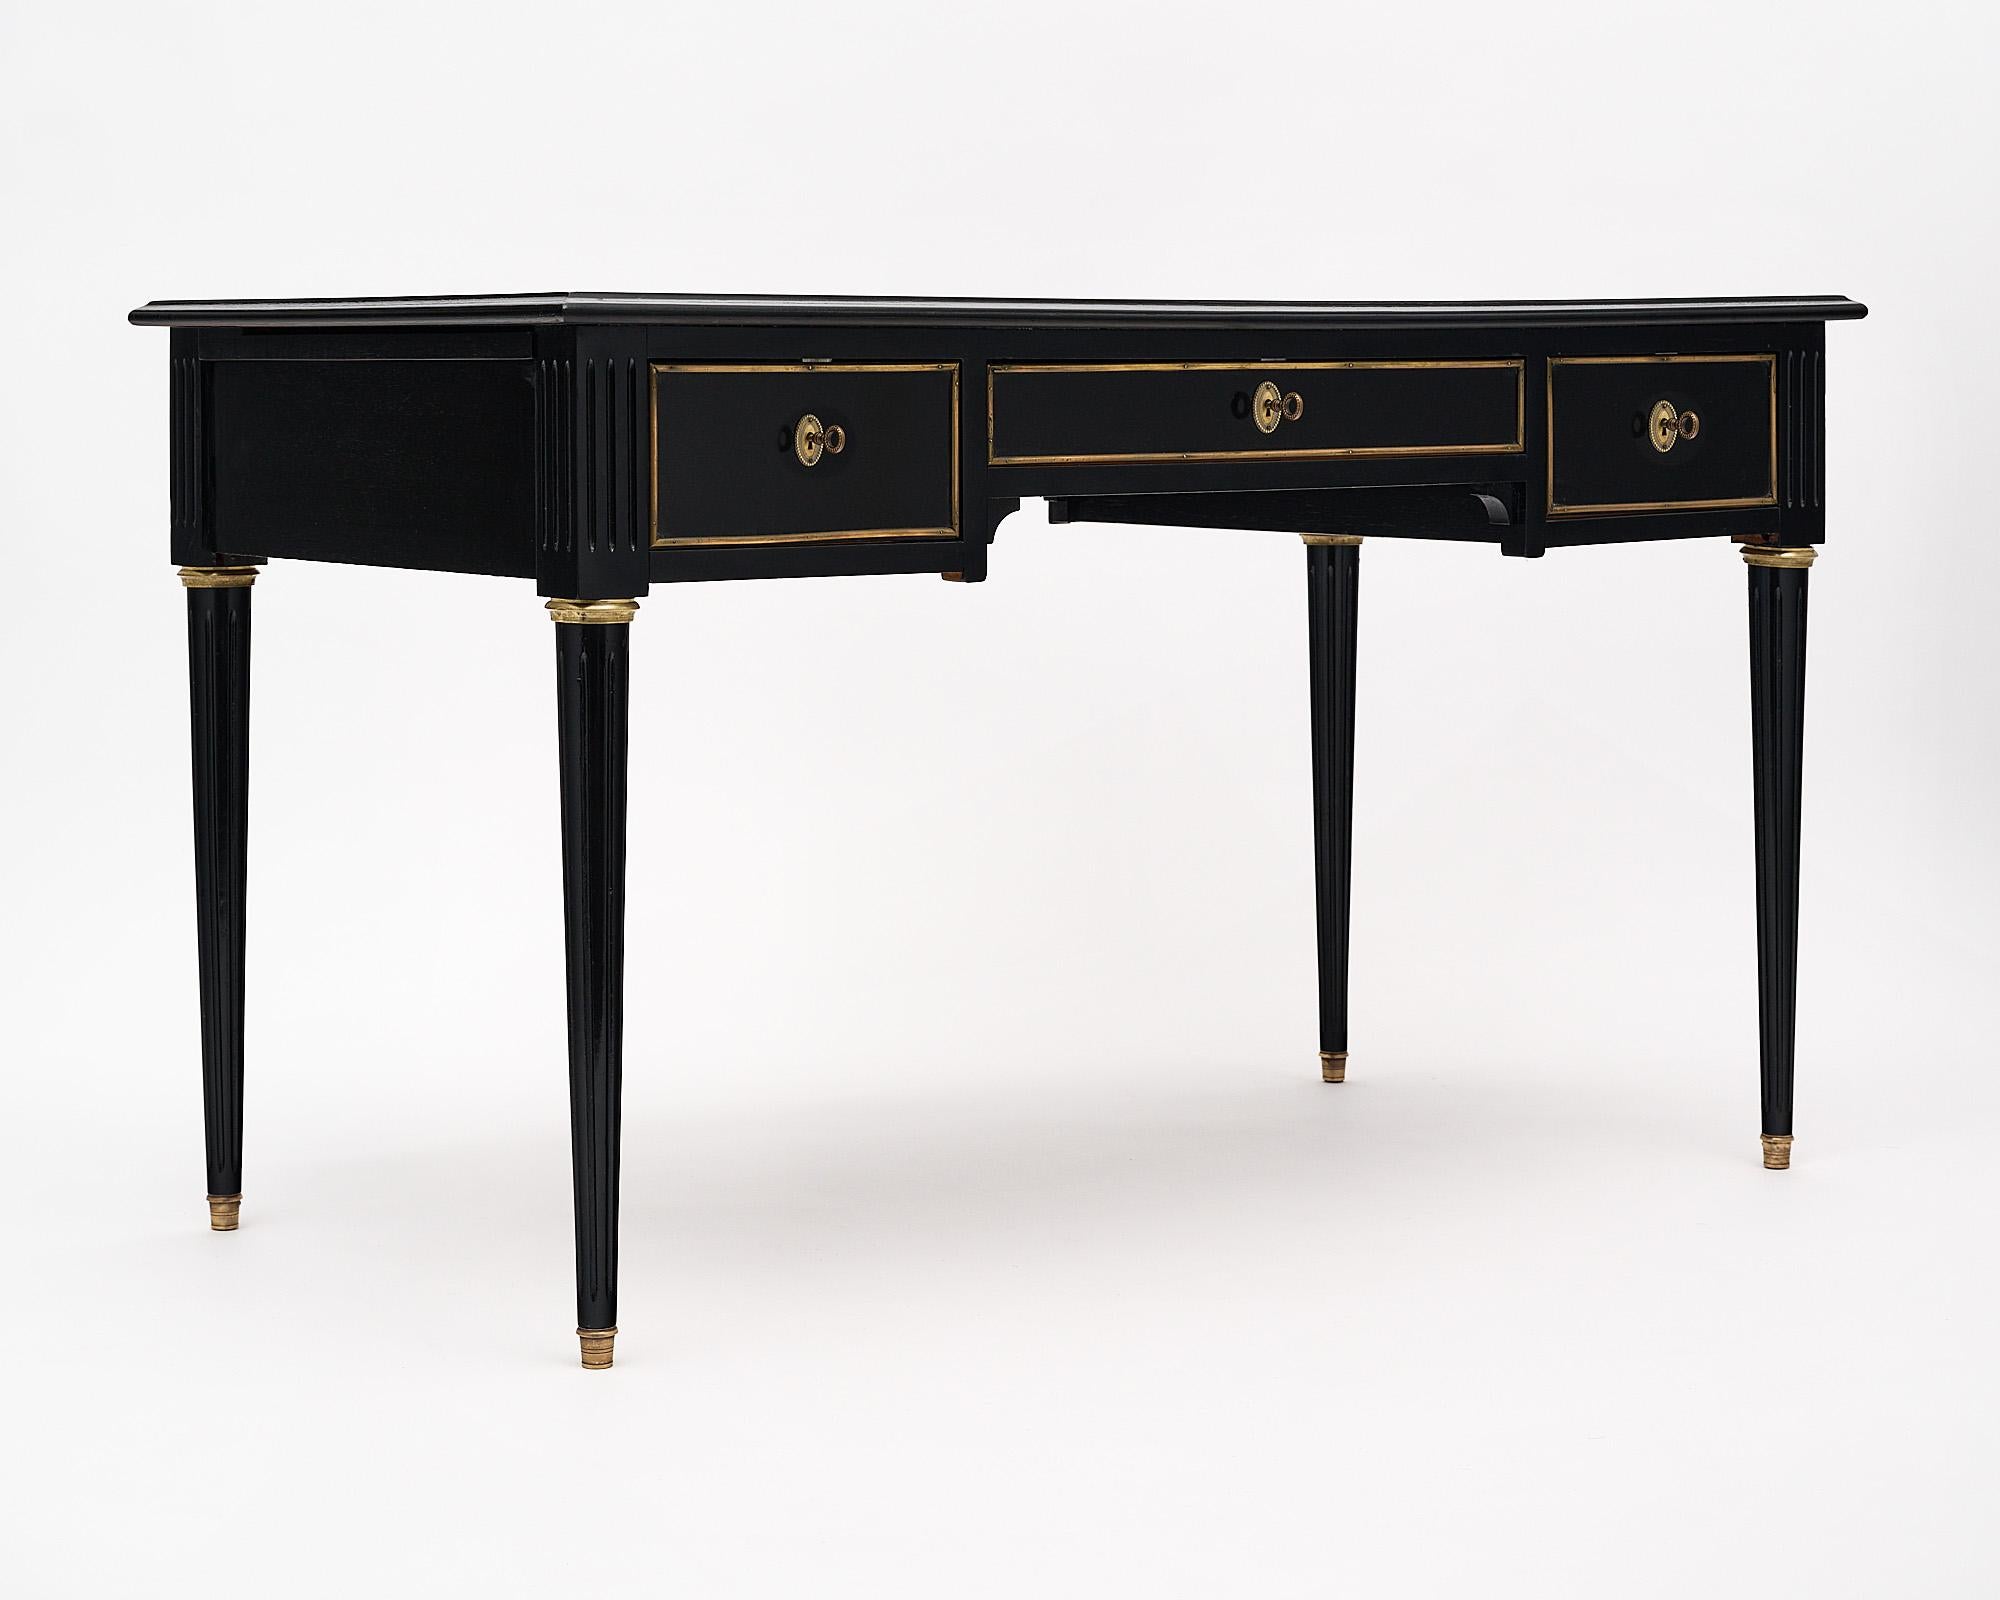 Desk, French, in the Louis XVI stye and made of ebonized mahogany that has been finished in a lustrous museum quality French polish. The French neoclassical desk features three dovetailed drawers and gilt brass trim and hardware throughout. The